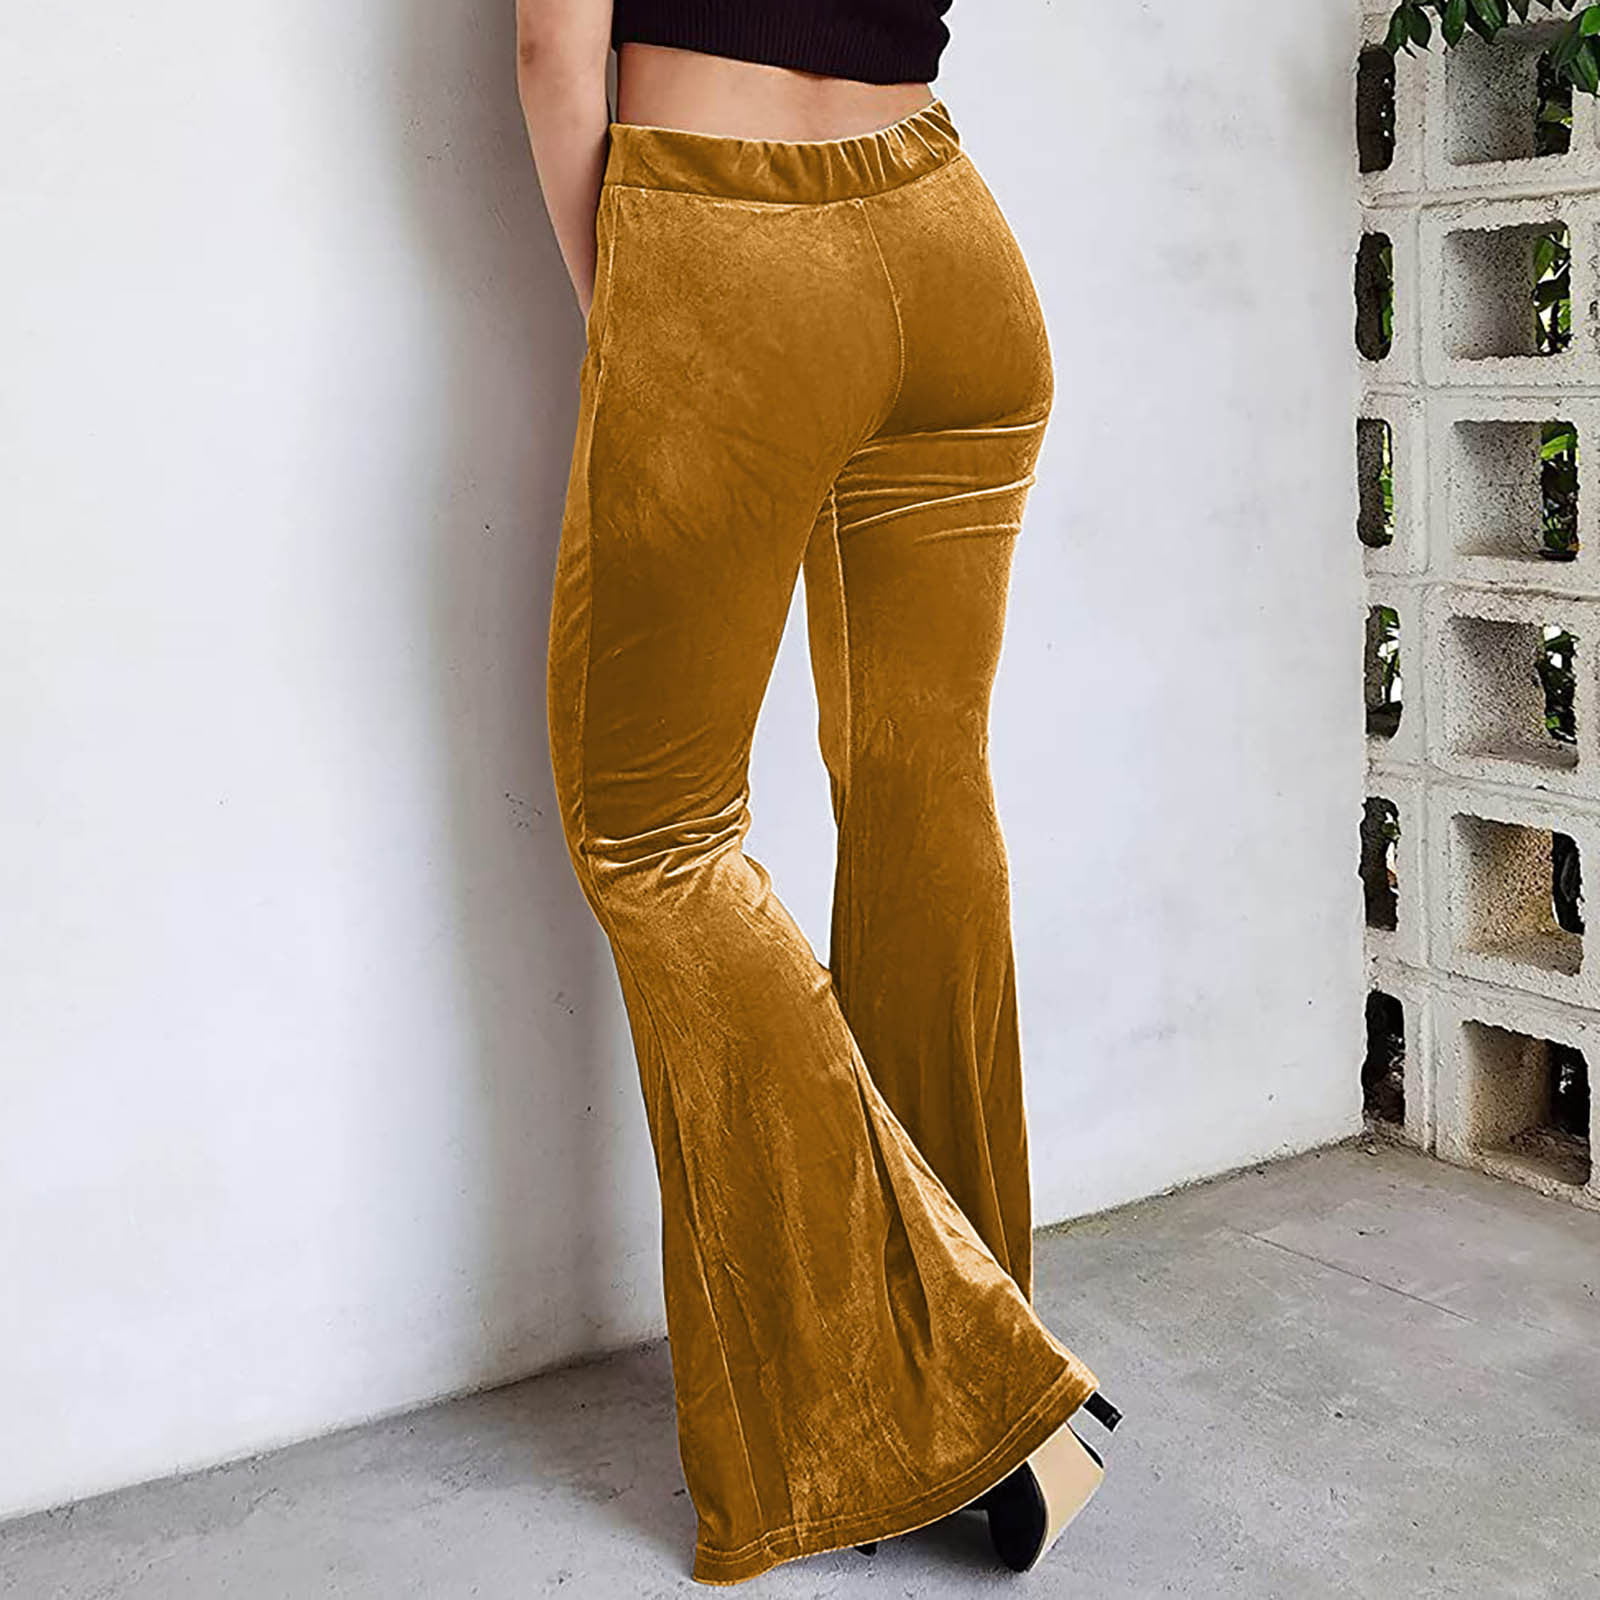 YWDJ Bell Bottom Pants for Women 70s High Waist High Rise Flared Elastic  Waist Casual Stretchy Long Pant Fashion Comfortable Solid Color Leisure  Bell-bottoms Pants Pants Everyday Wear 17-Green L 